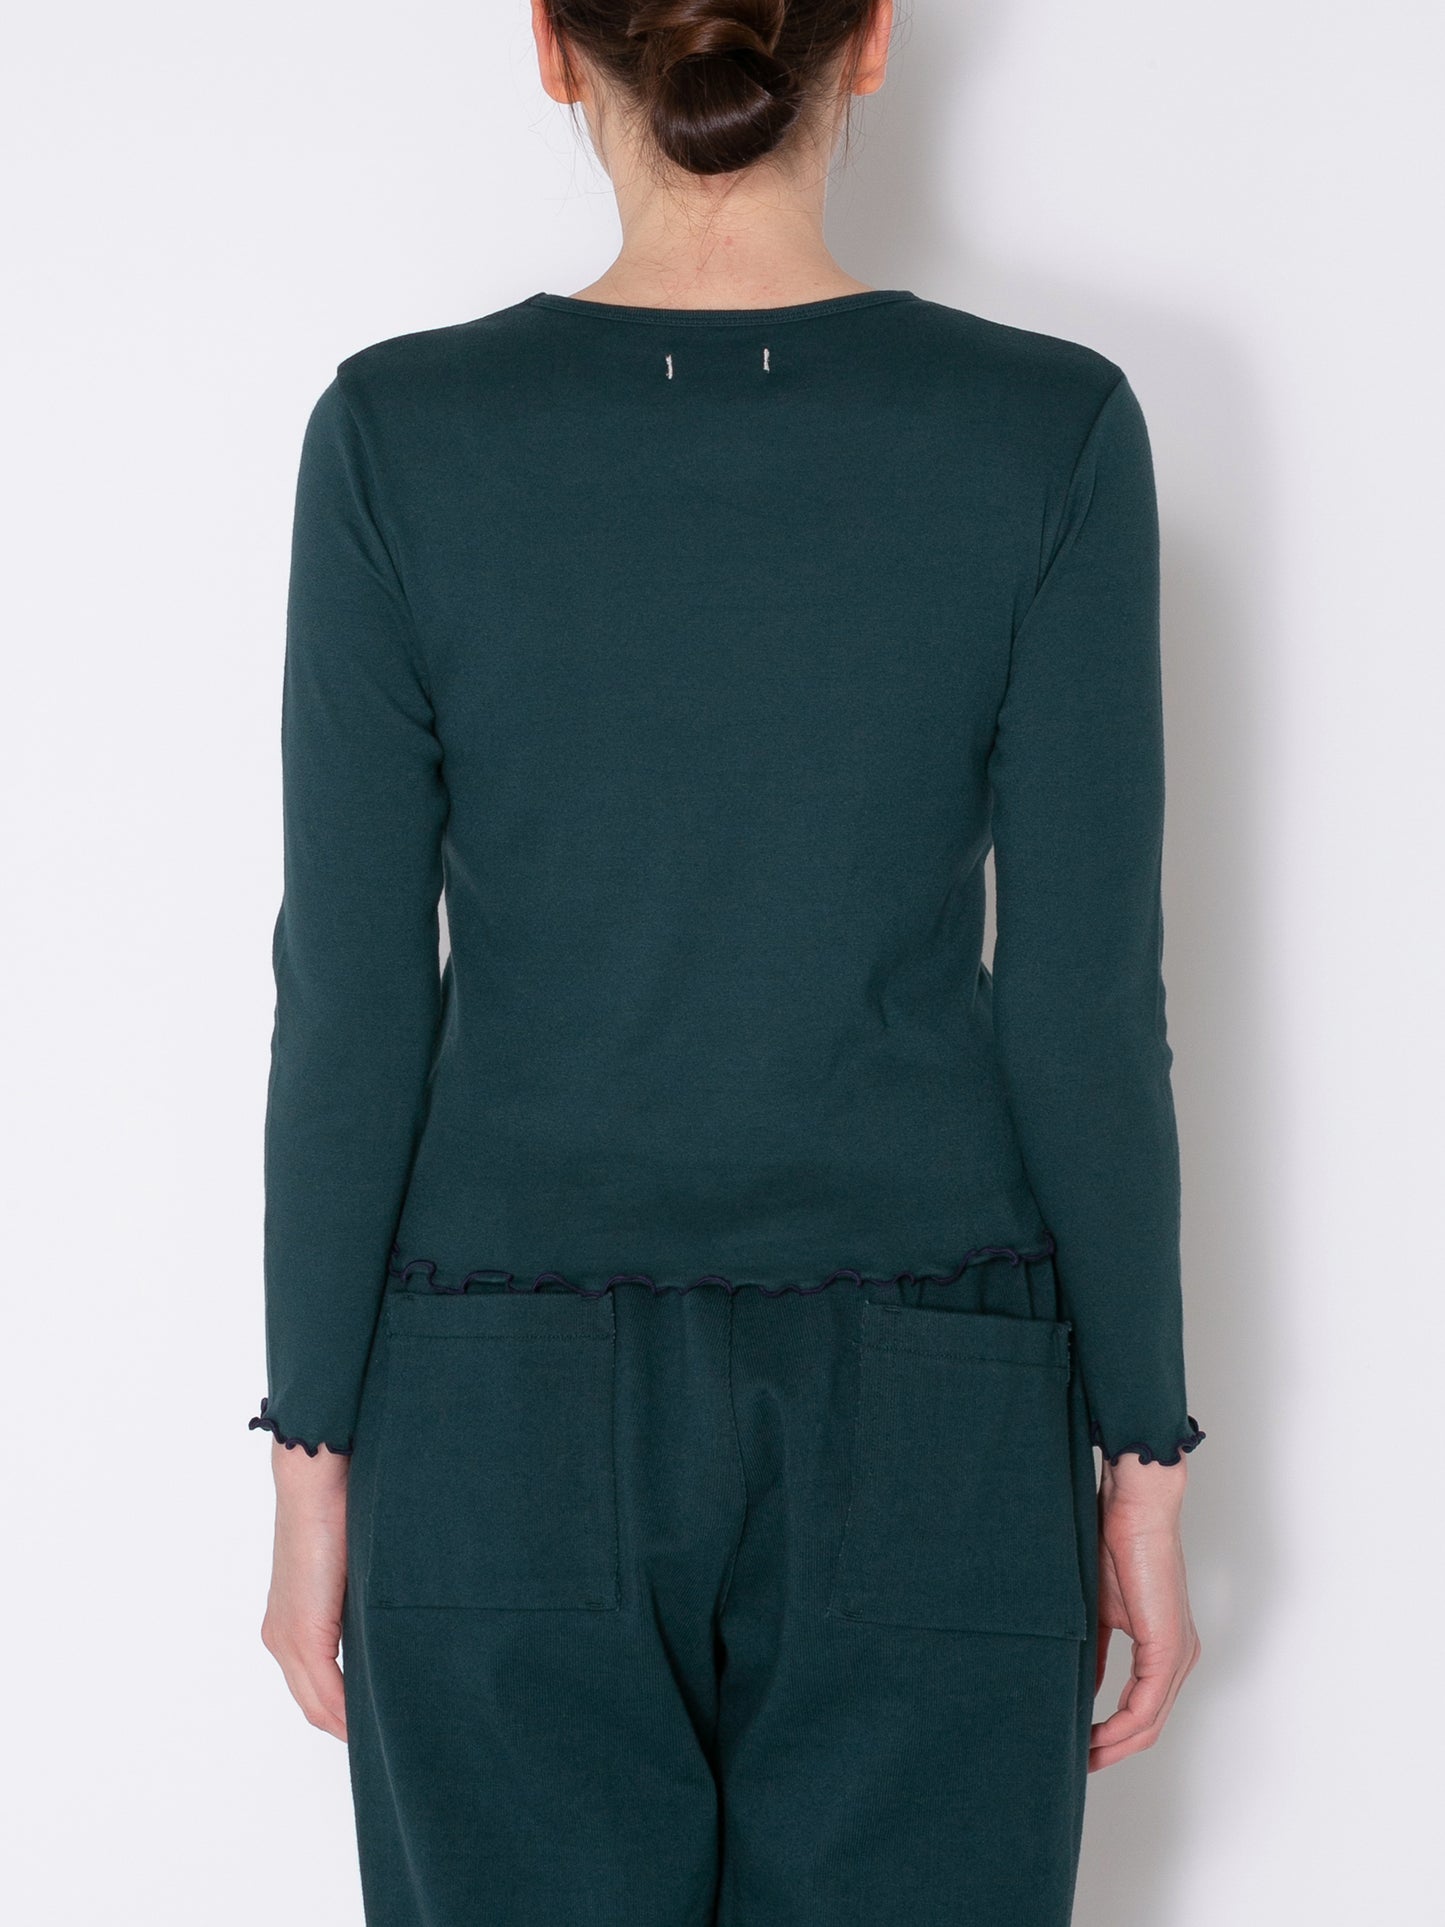 LOVER L/S TEE ORGANIC COTTON STRETCH JERSEY AM-C0010 Forest